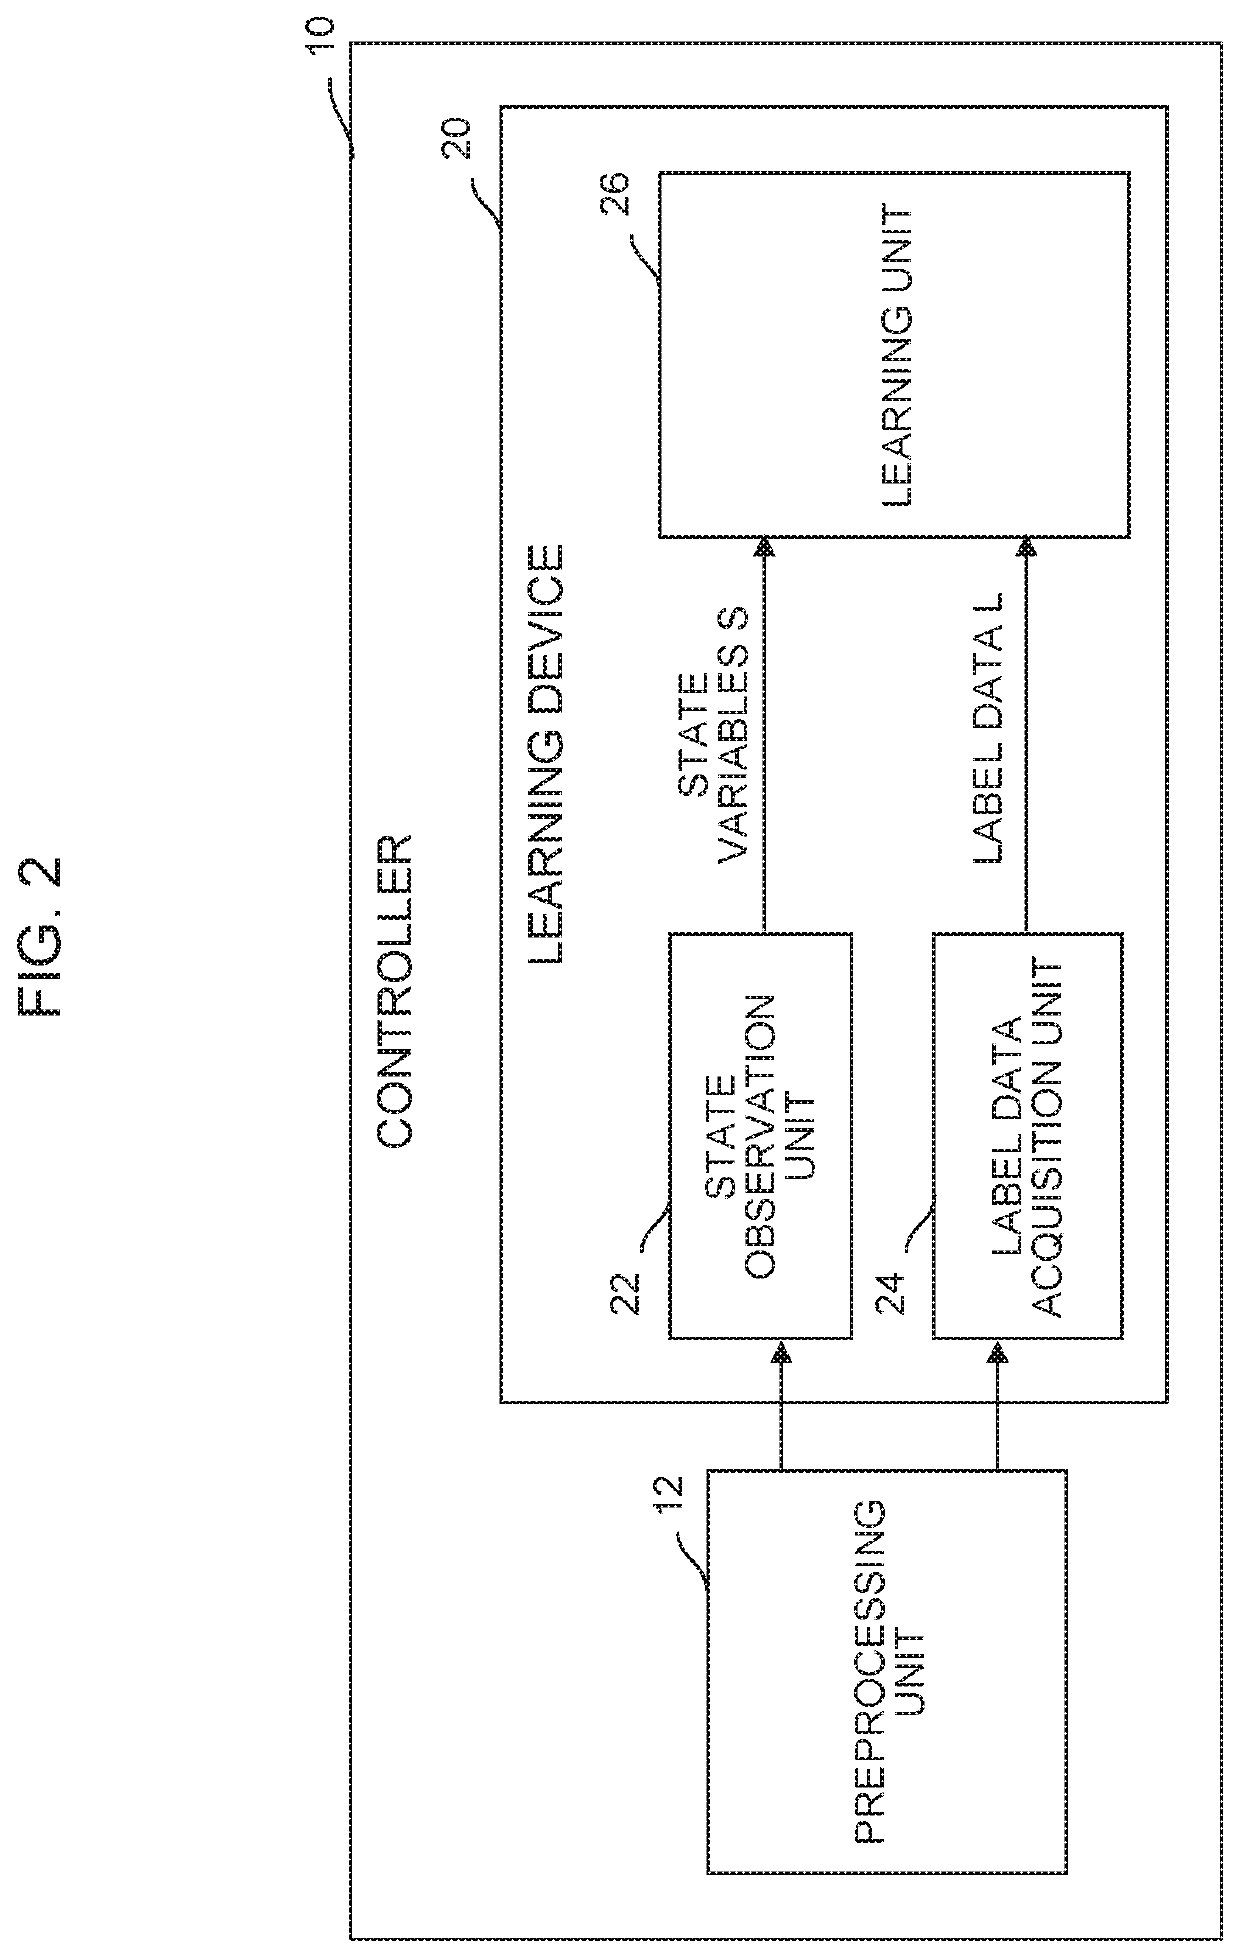 Learning device, controller, and control system